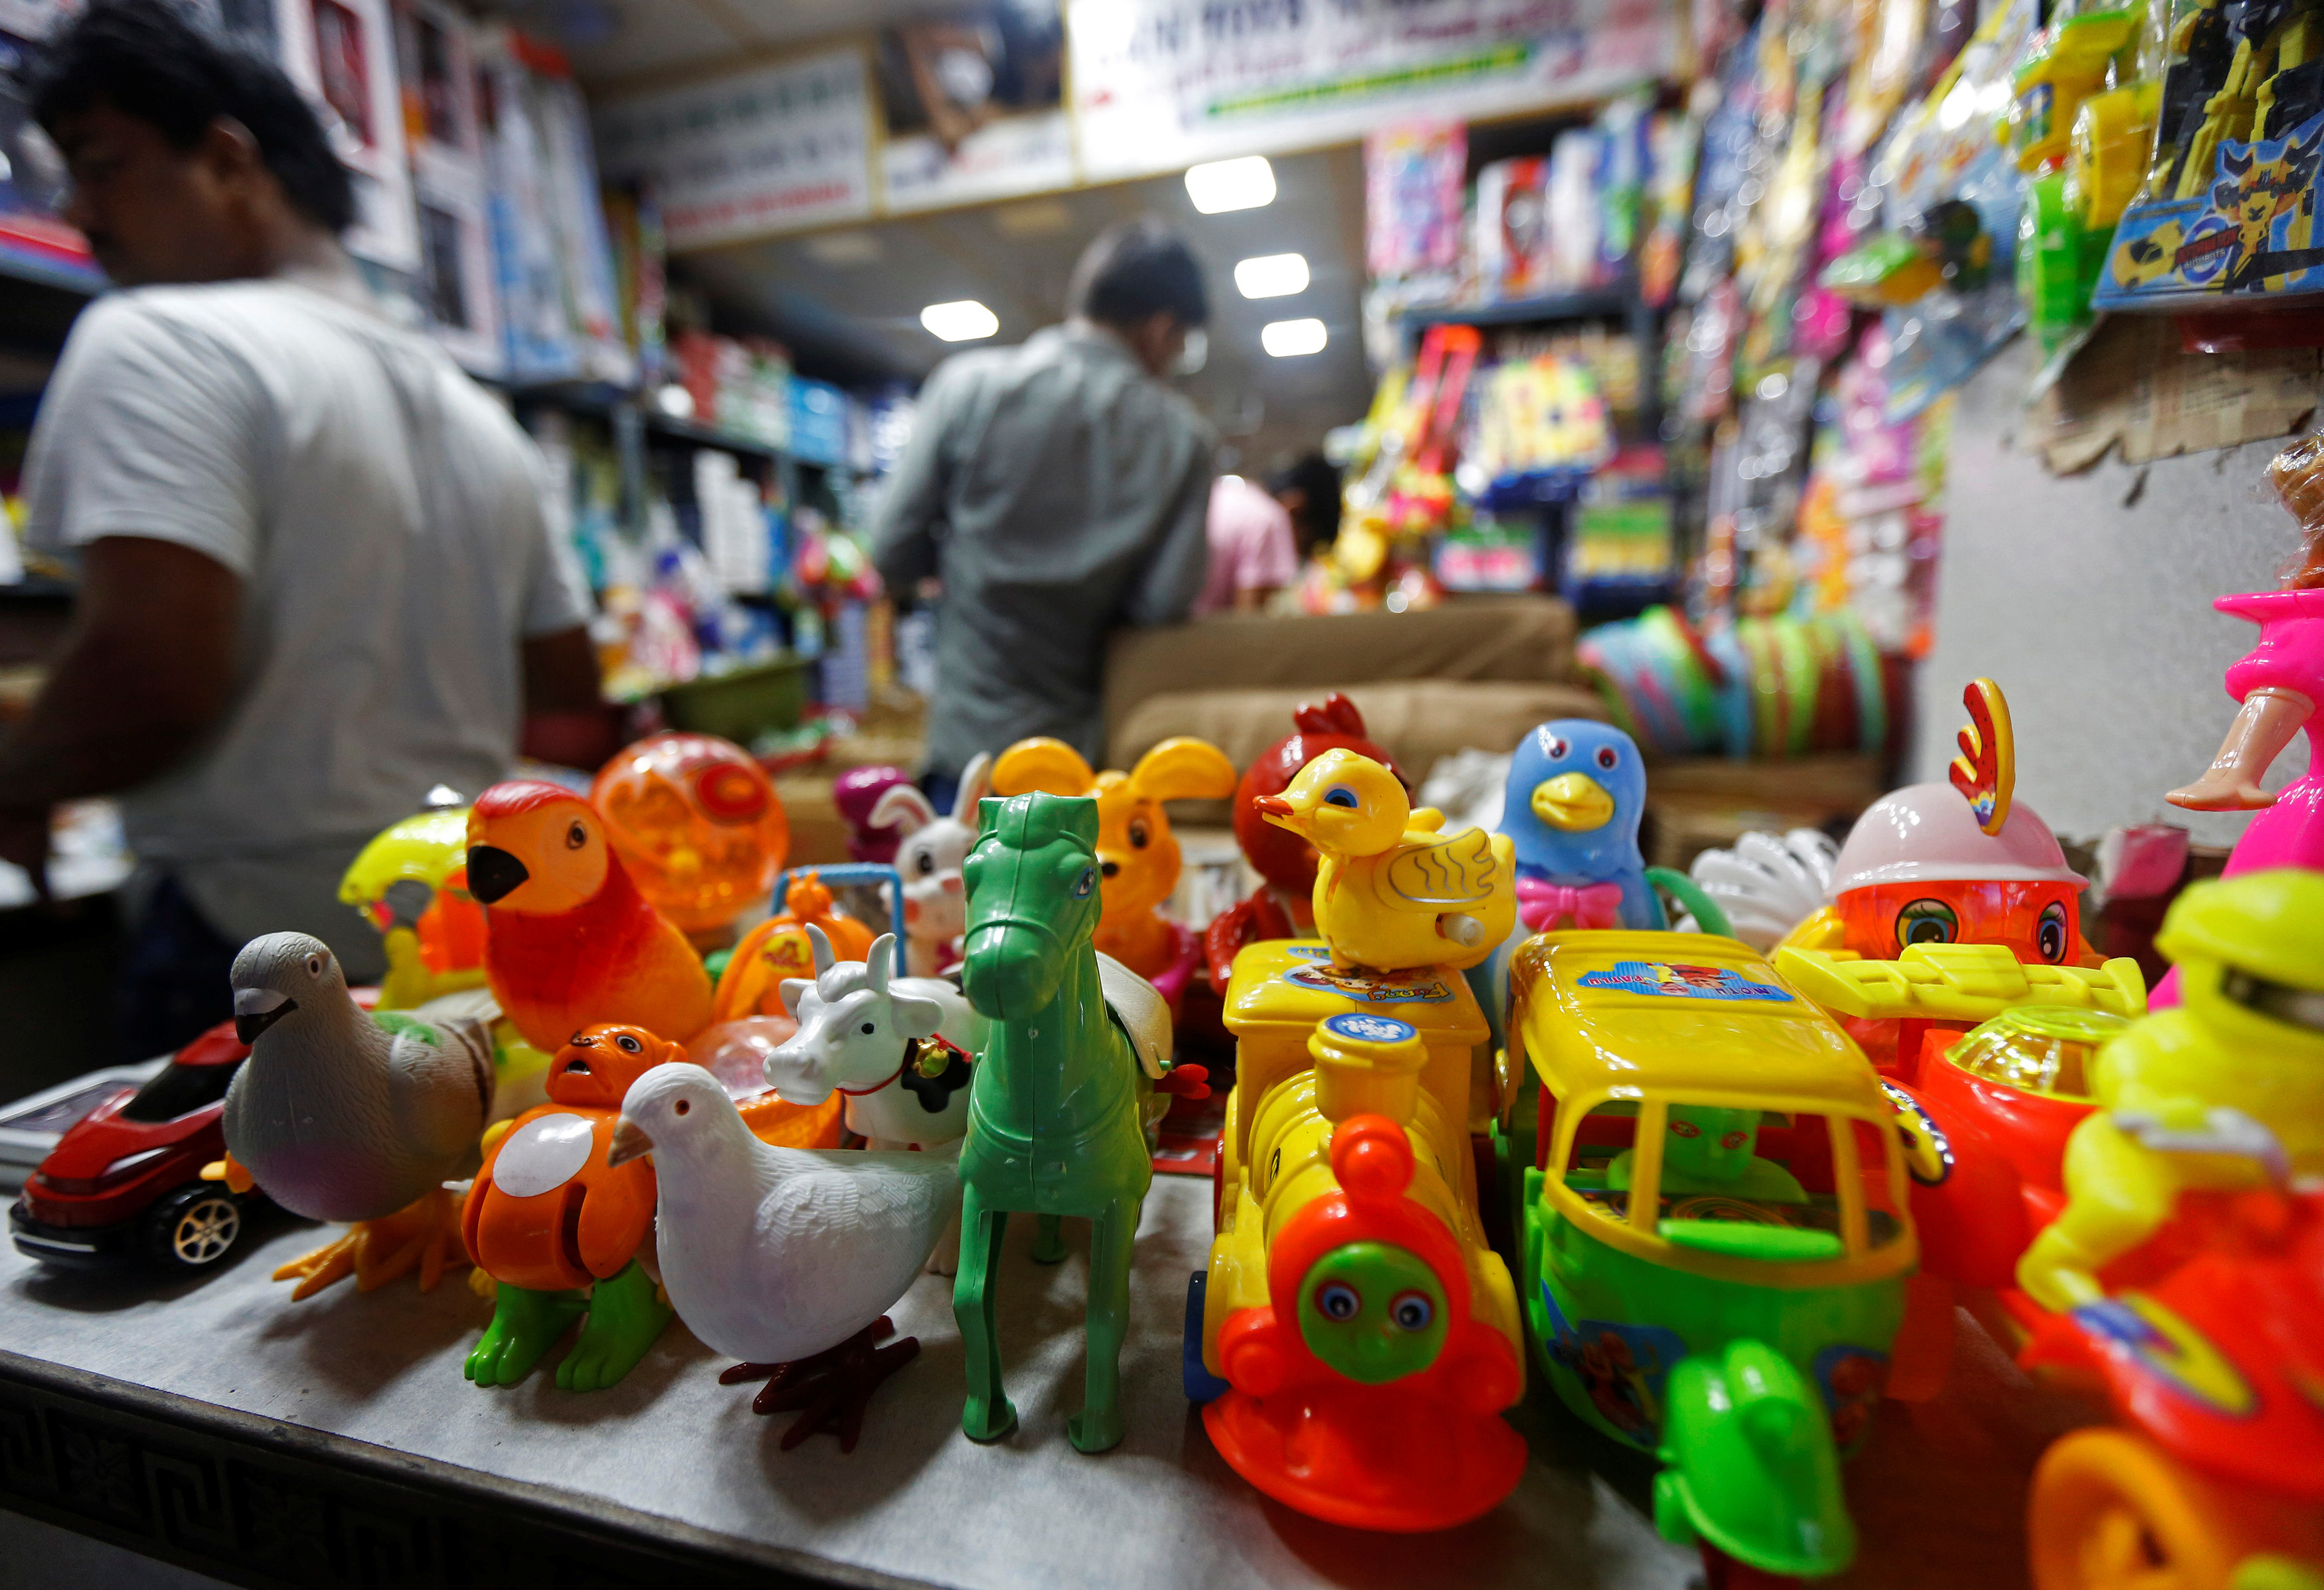 Toys are displayed inside a Chinese toy shop at a market in Kolkata